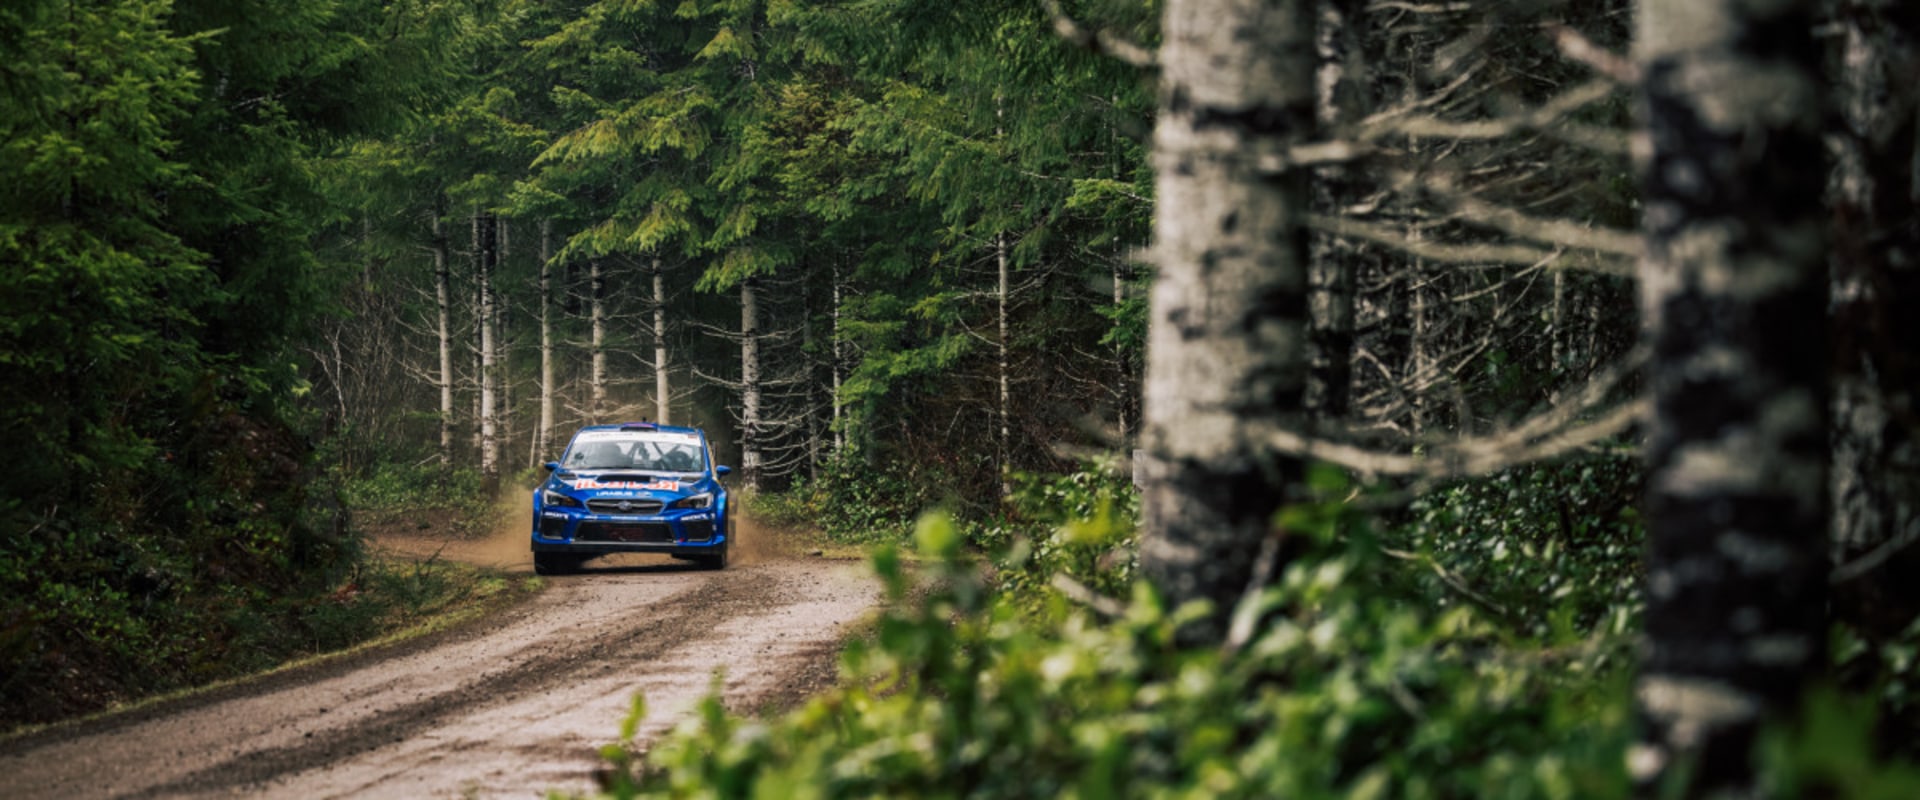 The Evolution of Rally Cars: A Comprehensive Look into the History of AWD Racing Rally